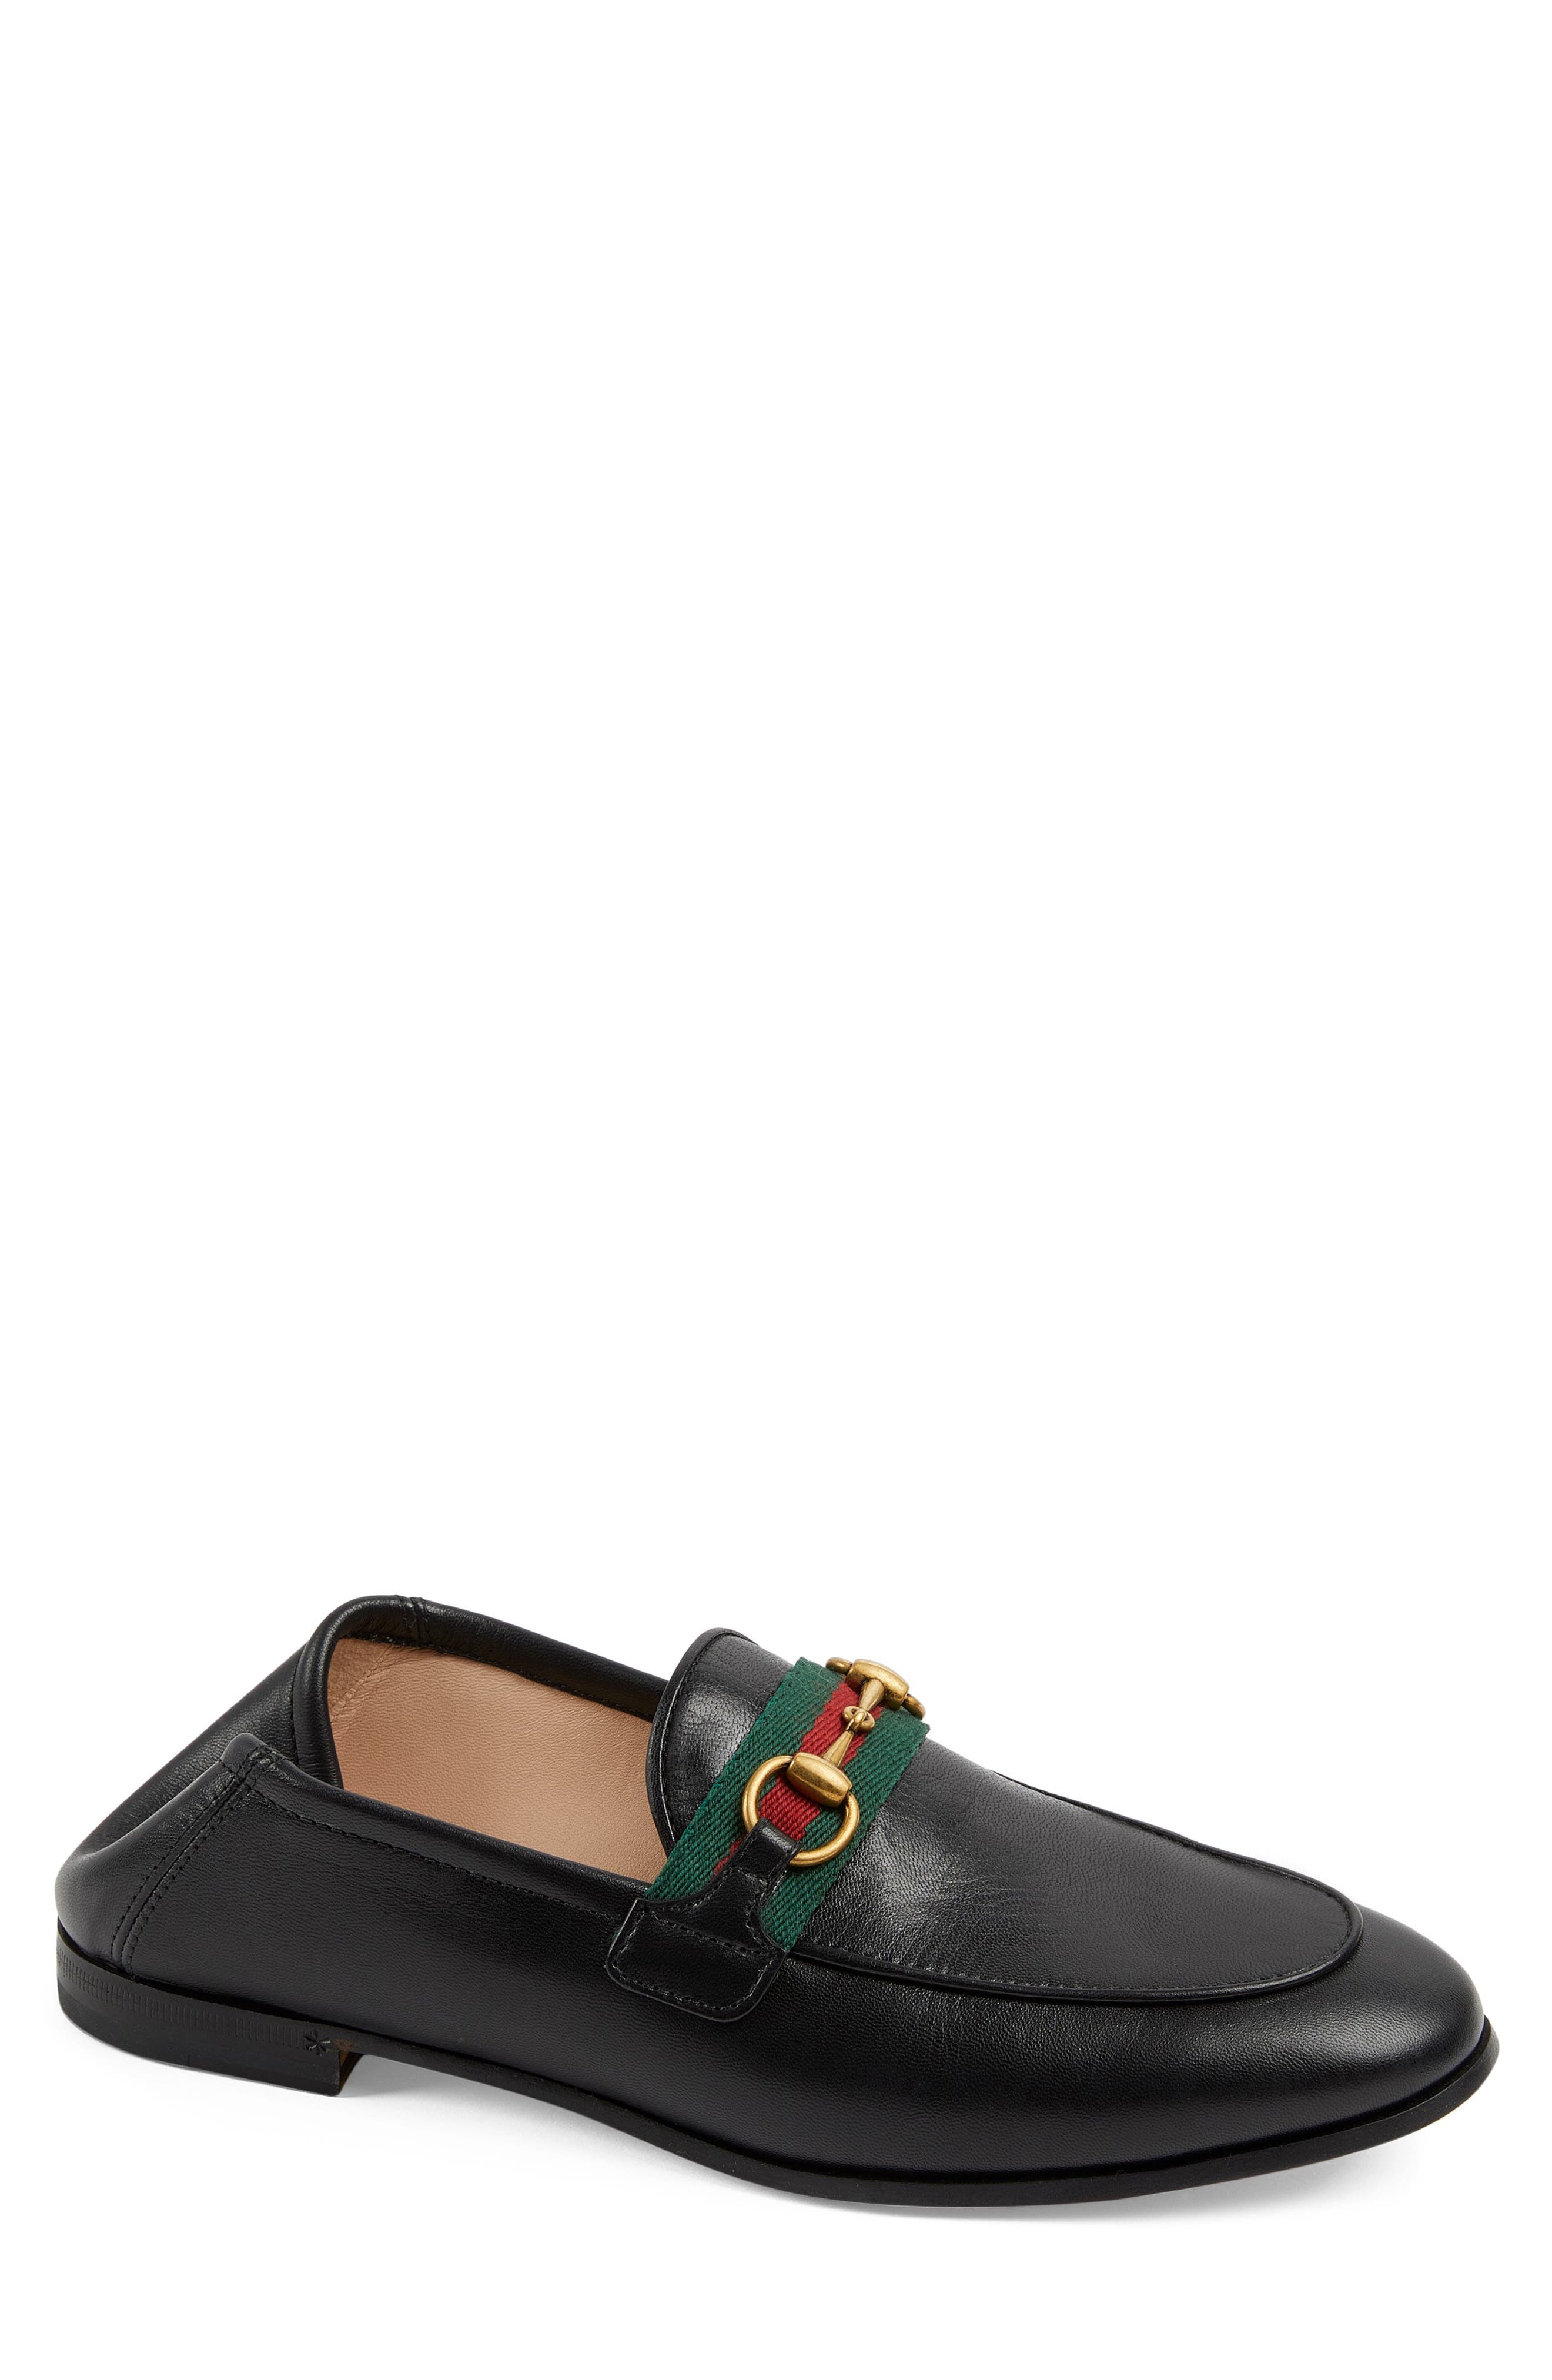 gucci shoes women loafers